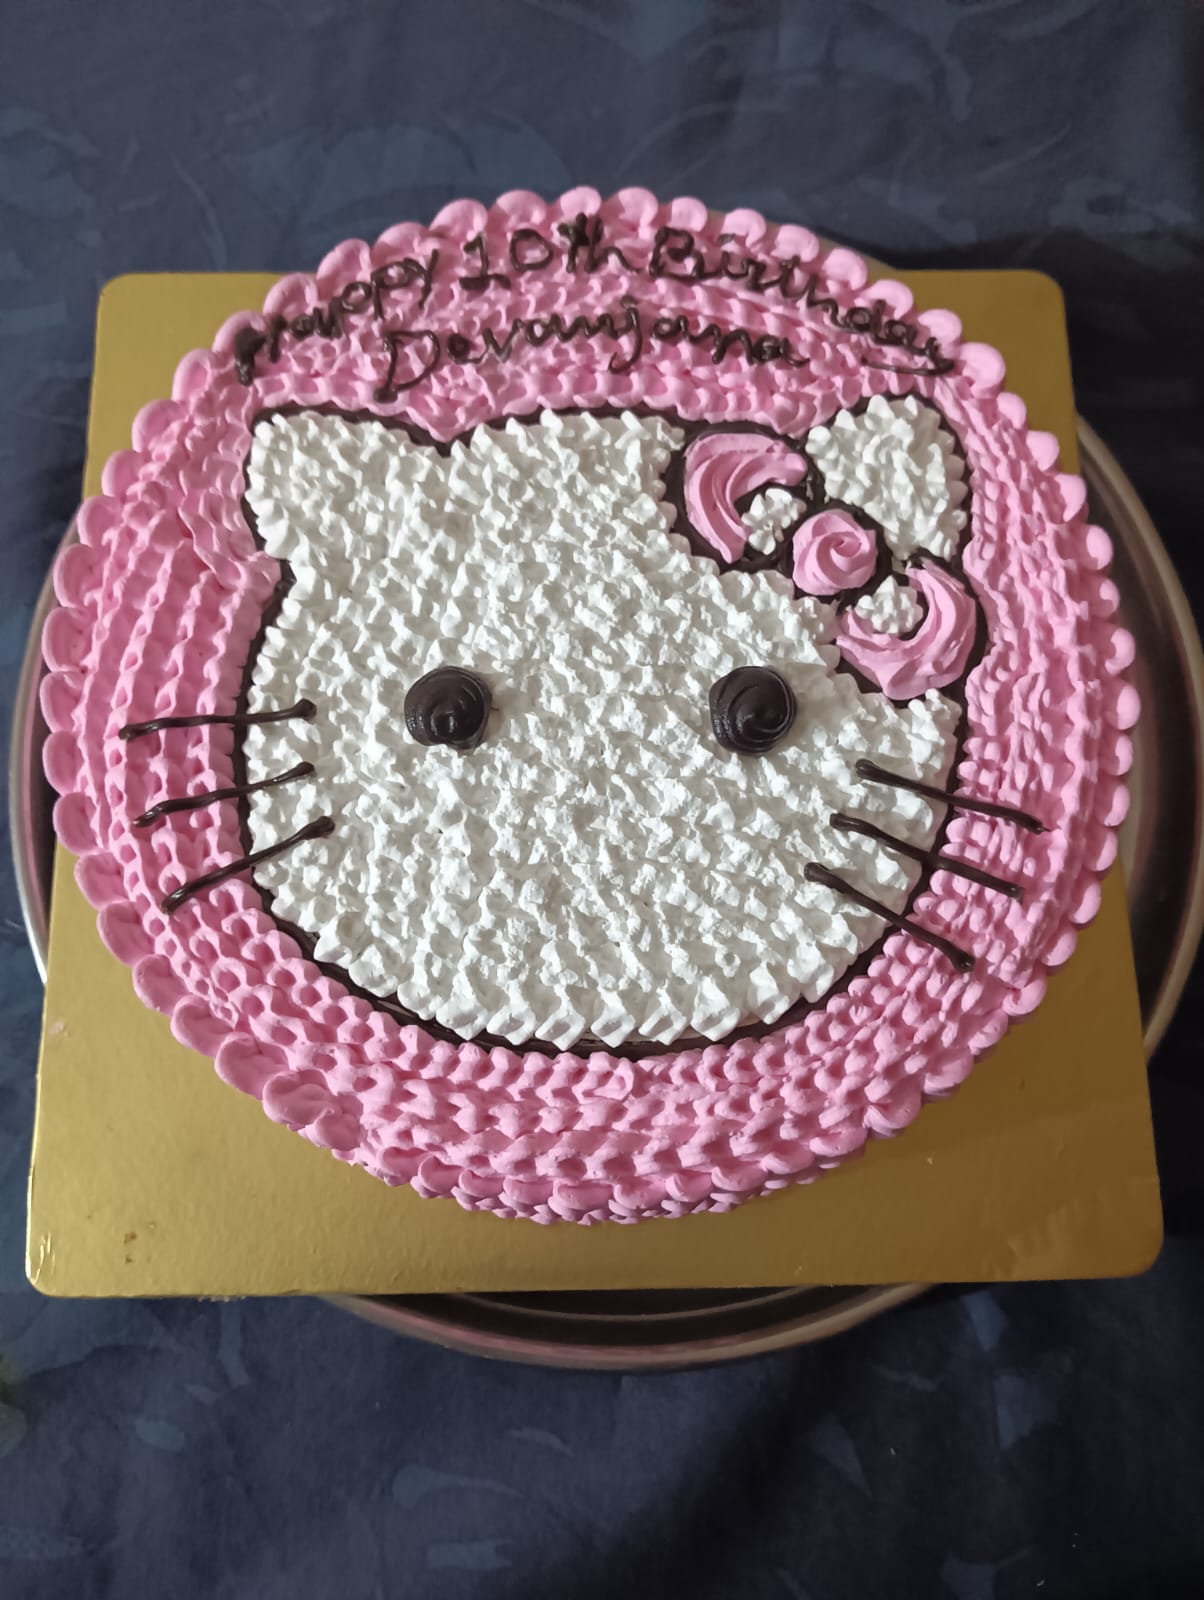 Hello Kitty Rainbow Layer Cake with Cream Cheese Frosting